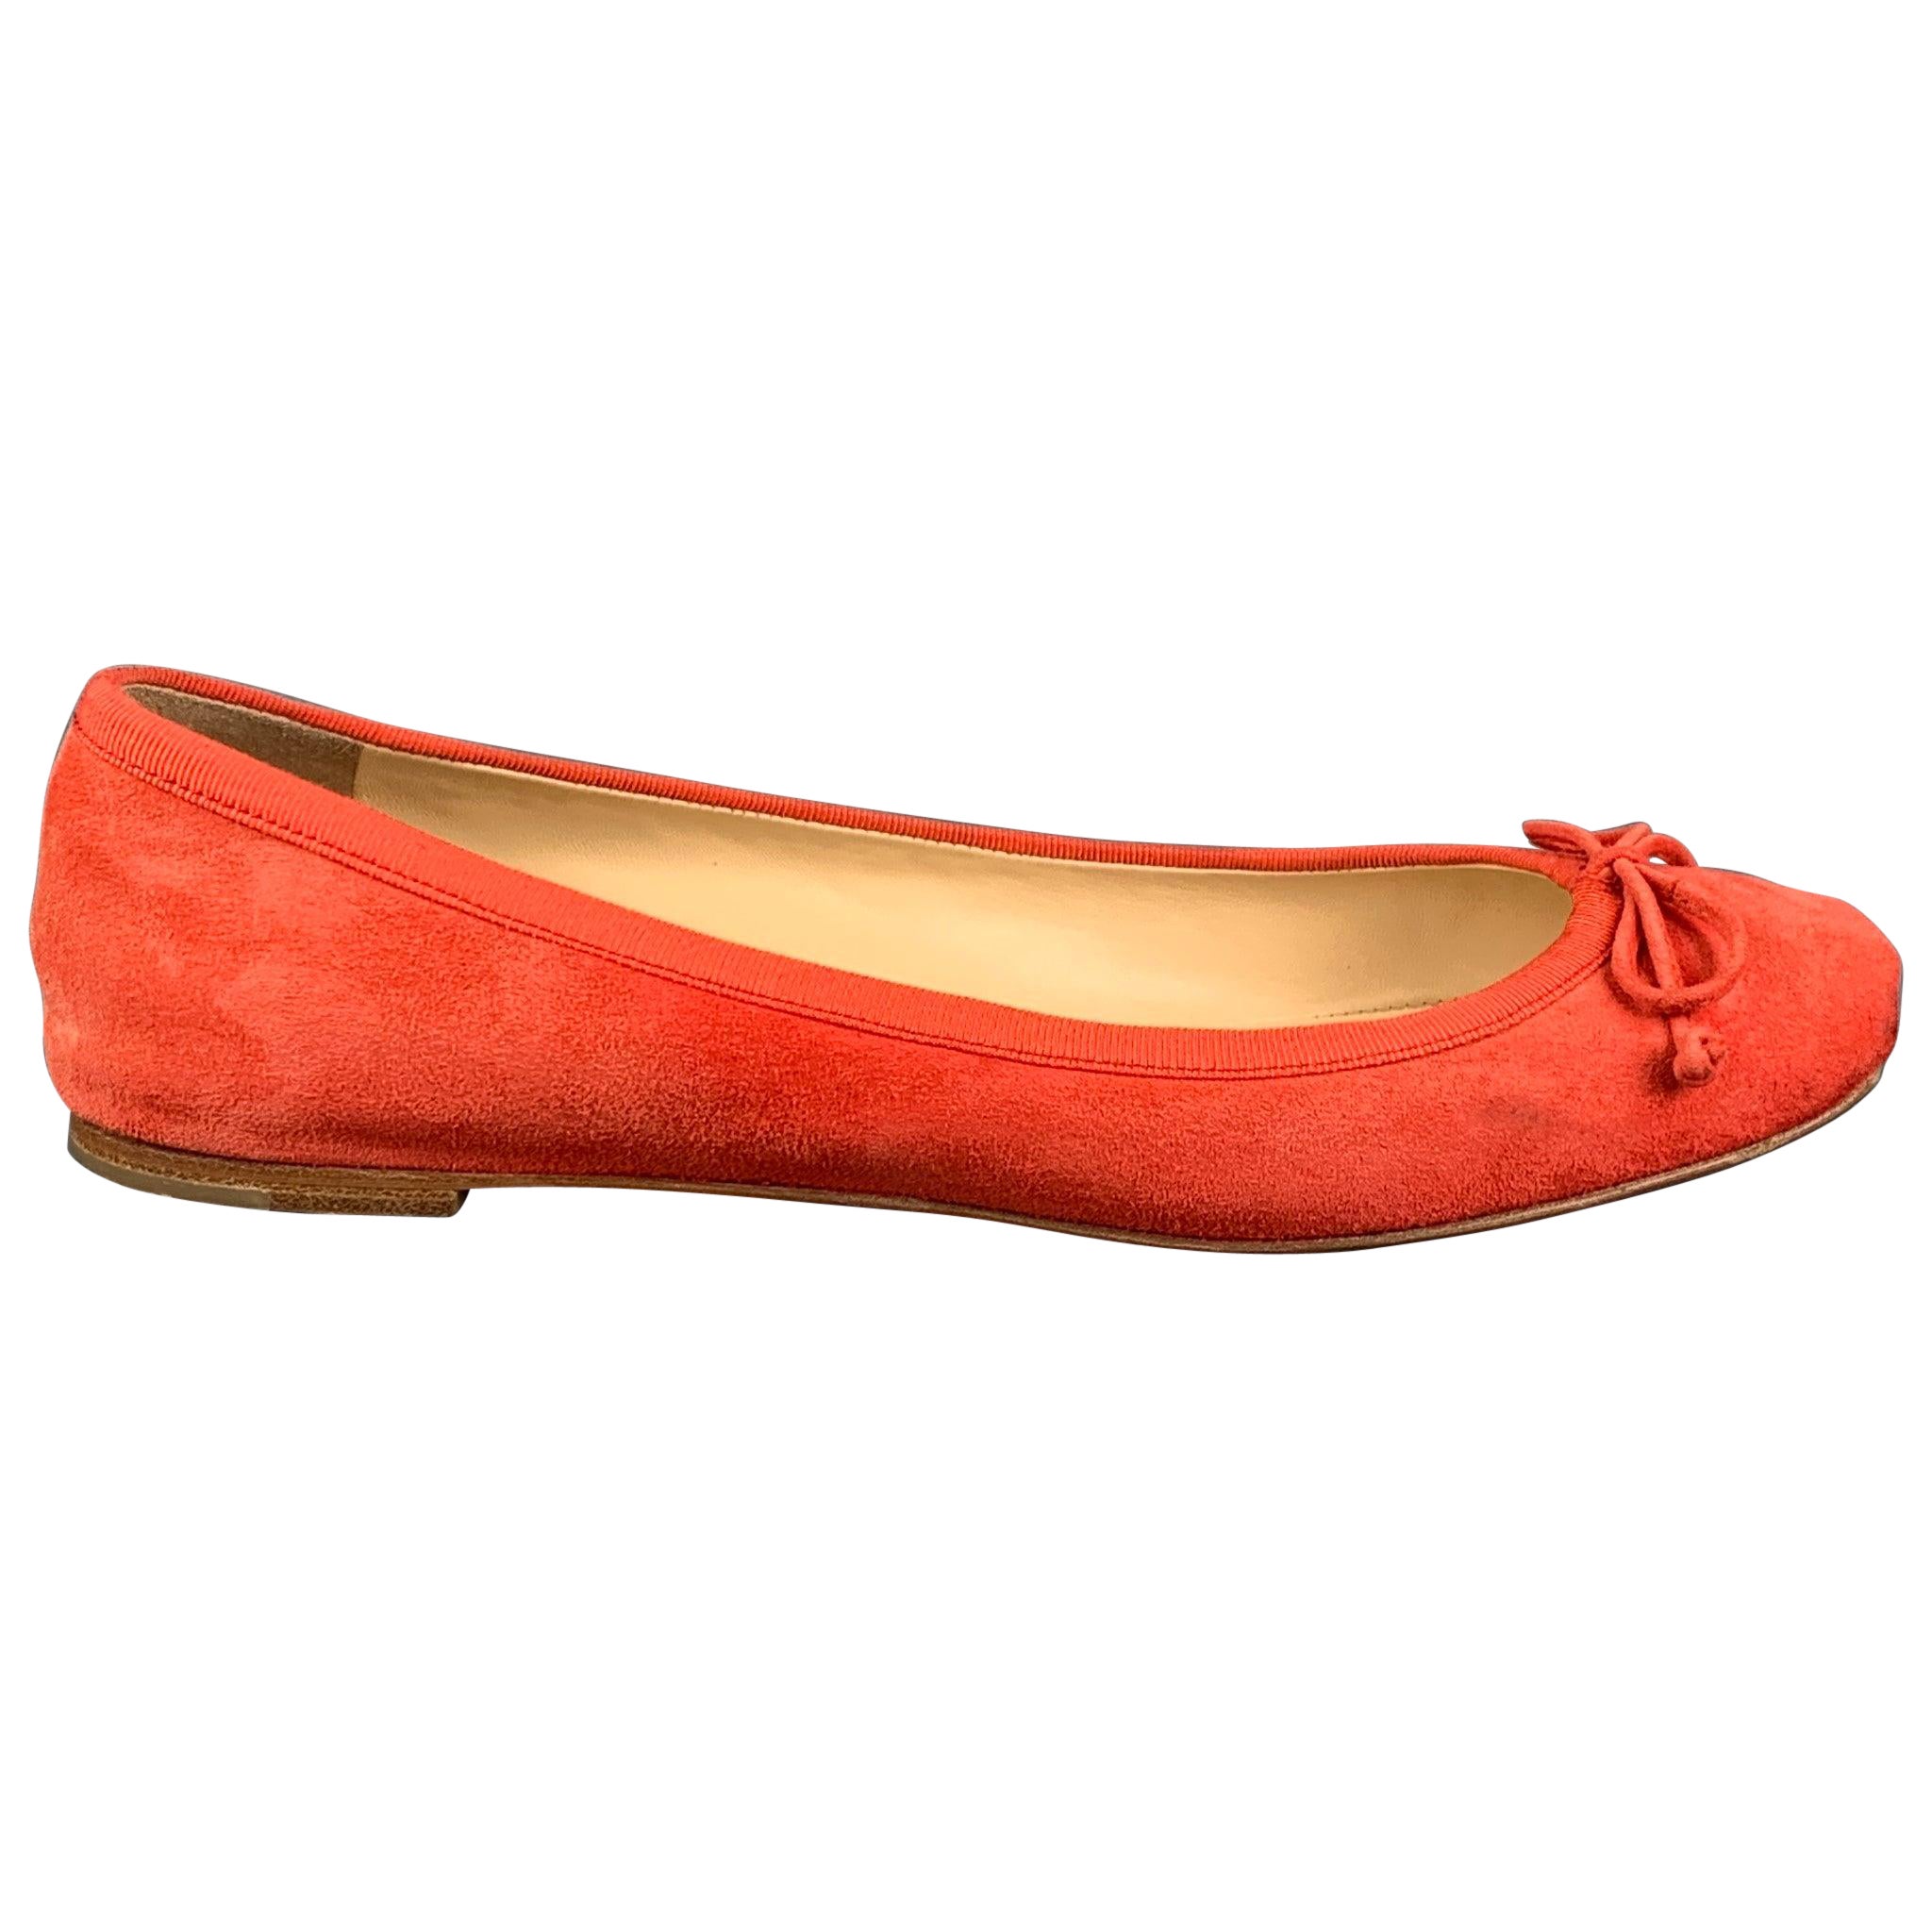 CHRISTIAN LOUBOUTIN Size 6.5 Coral Suede Ballet Flats For Sale